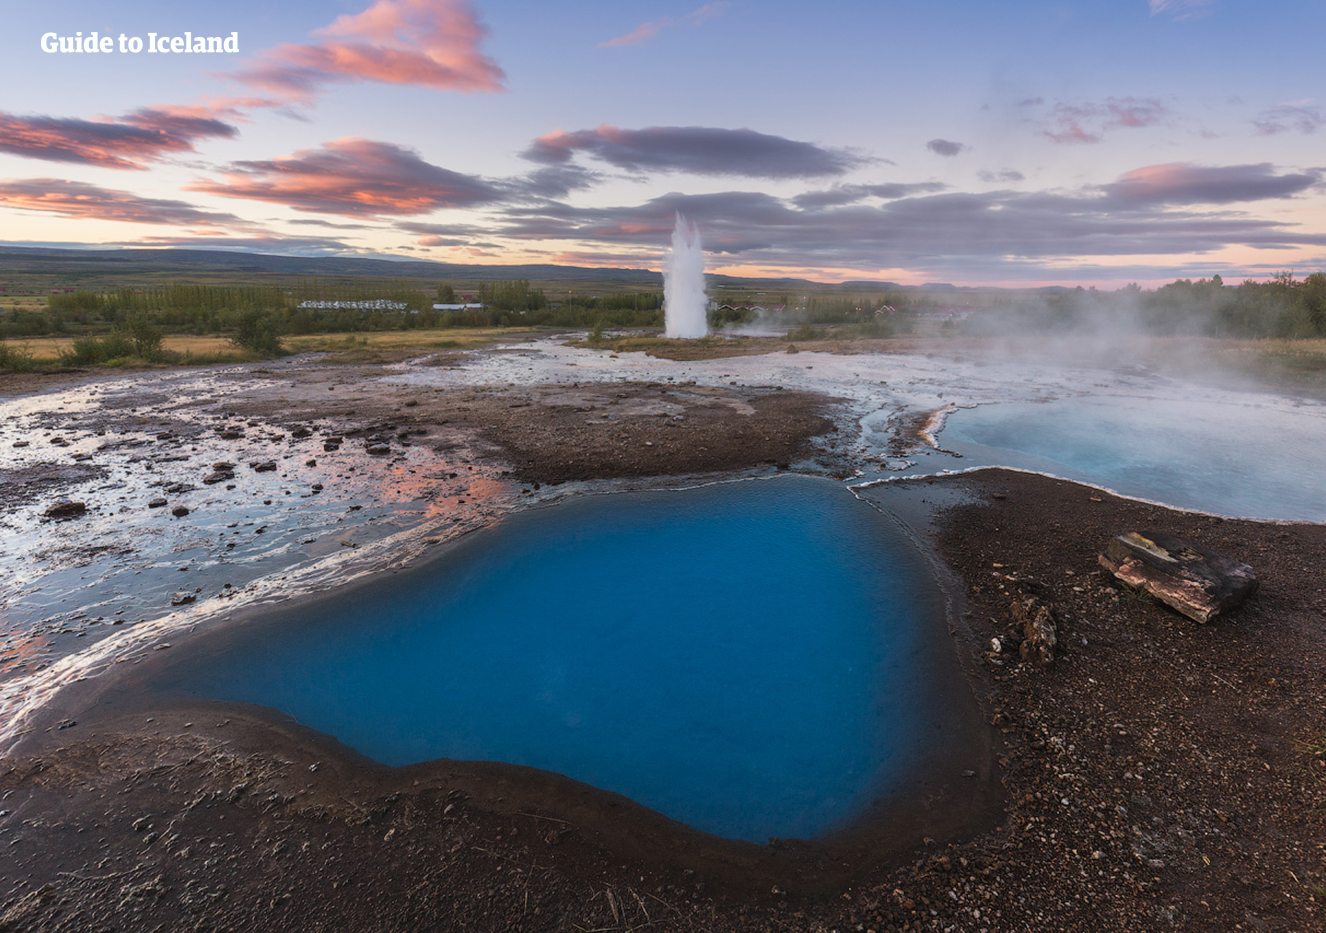 Geysir is a dormant hot spring in the geothermal area, Haukadalur Valley, found in South Iceland.